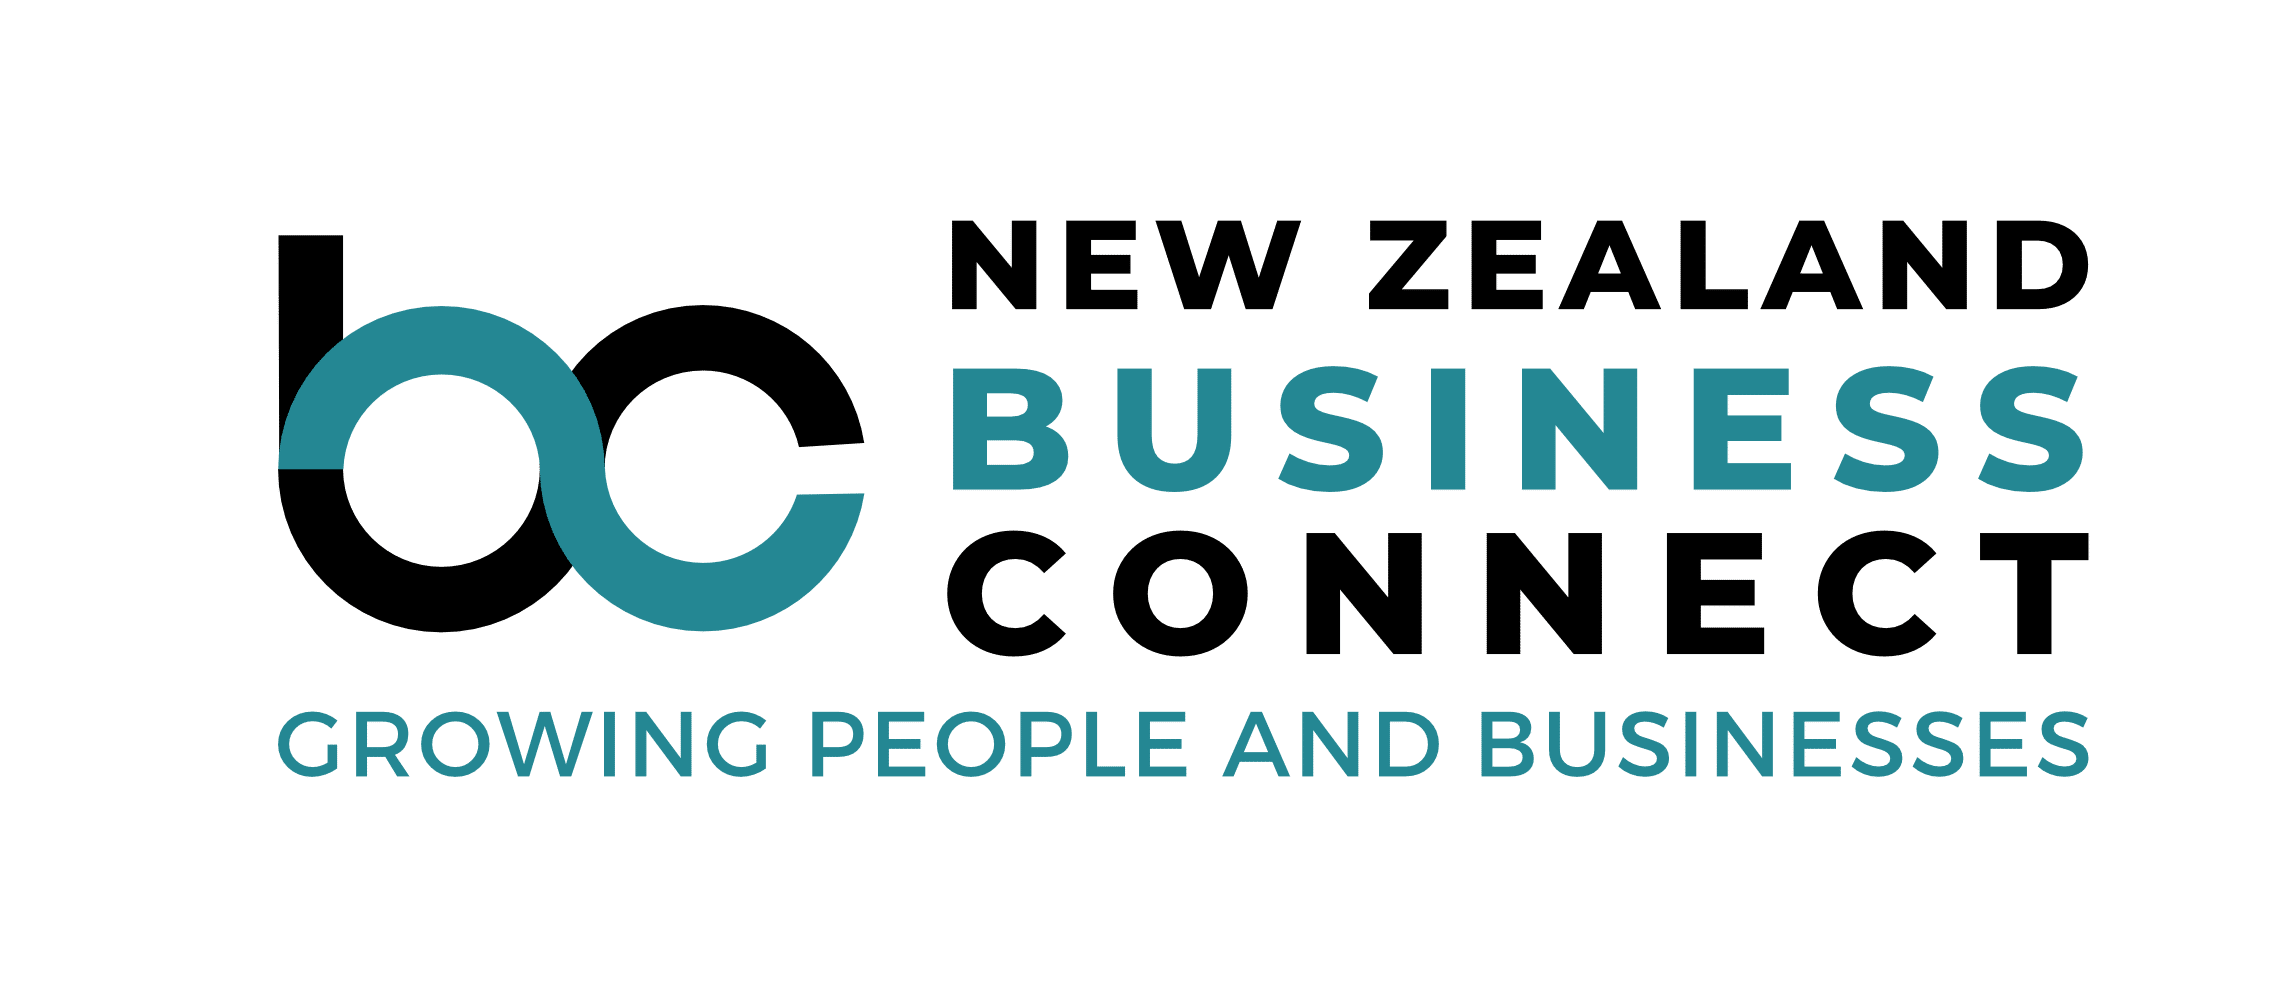 New Zealand Business Connect